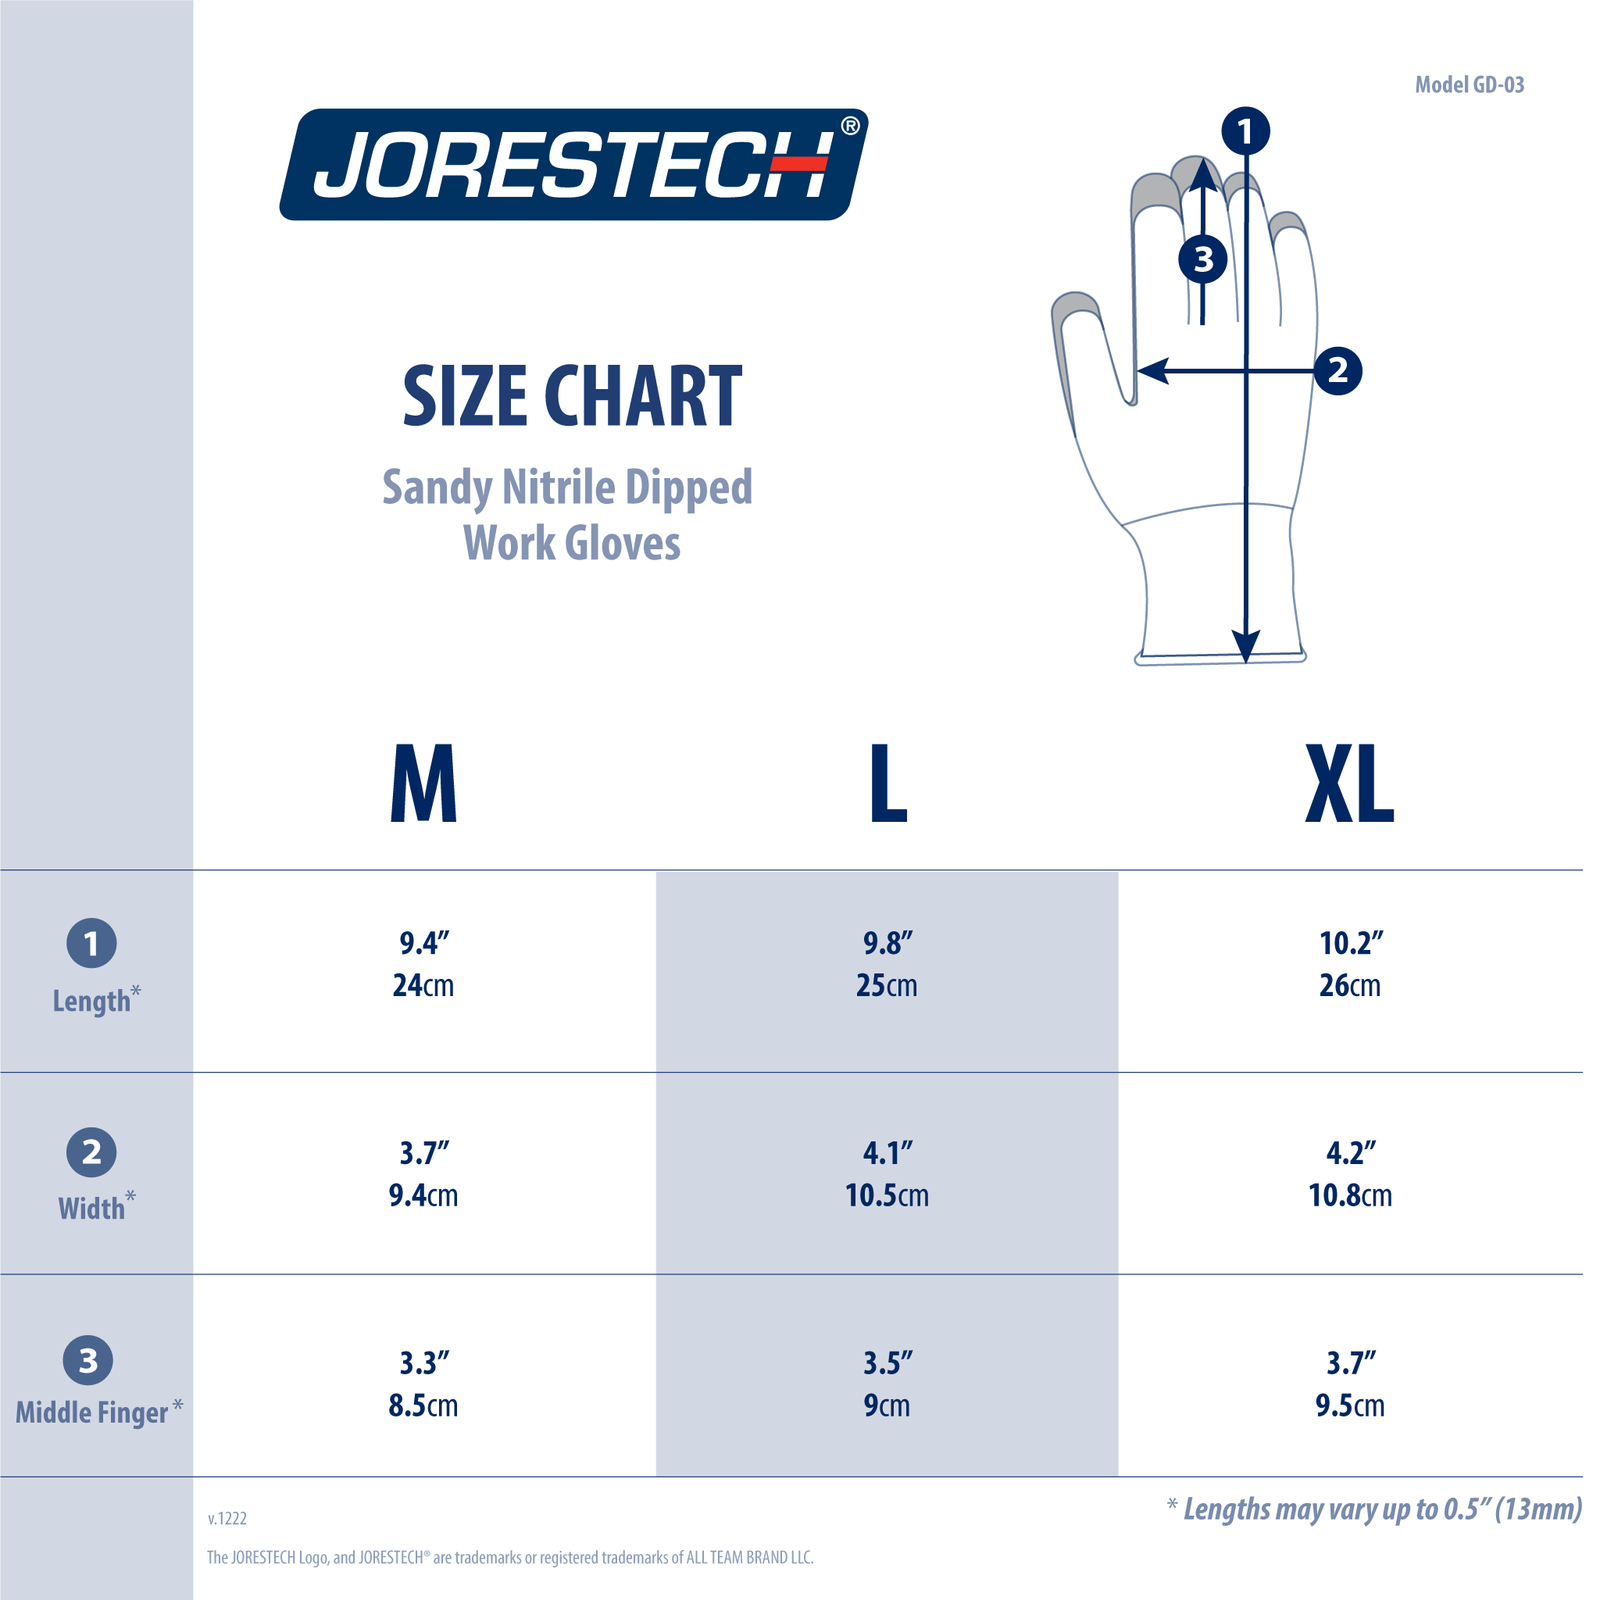 Size chart of the JORESTECH cut resistant safety work gloves with sandy nitrile dipped palms